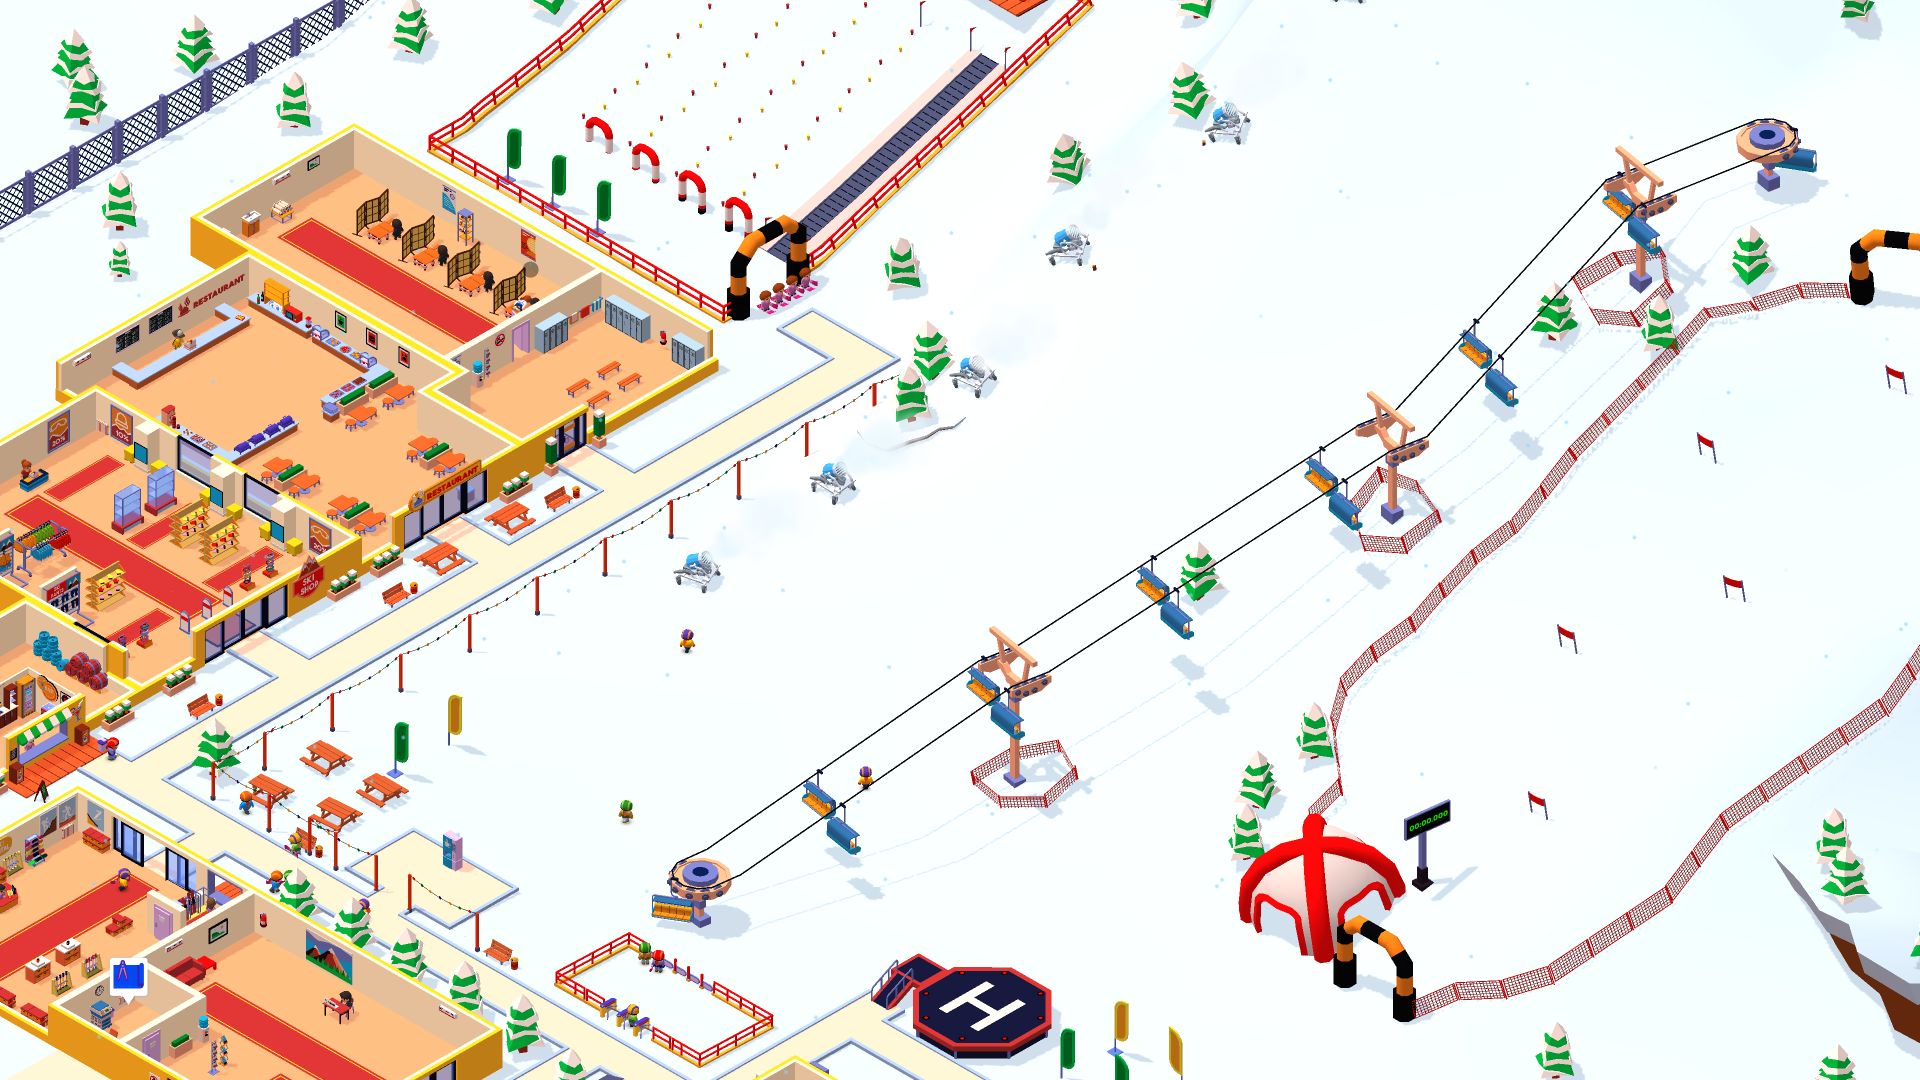 Ski Resort: Idle Tycoon - Idle Snow! for Android